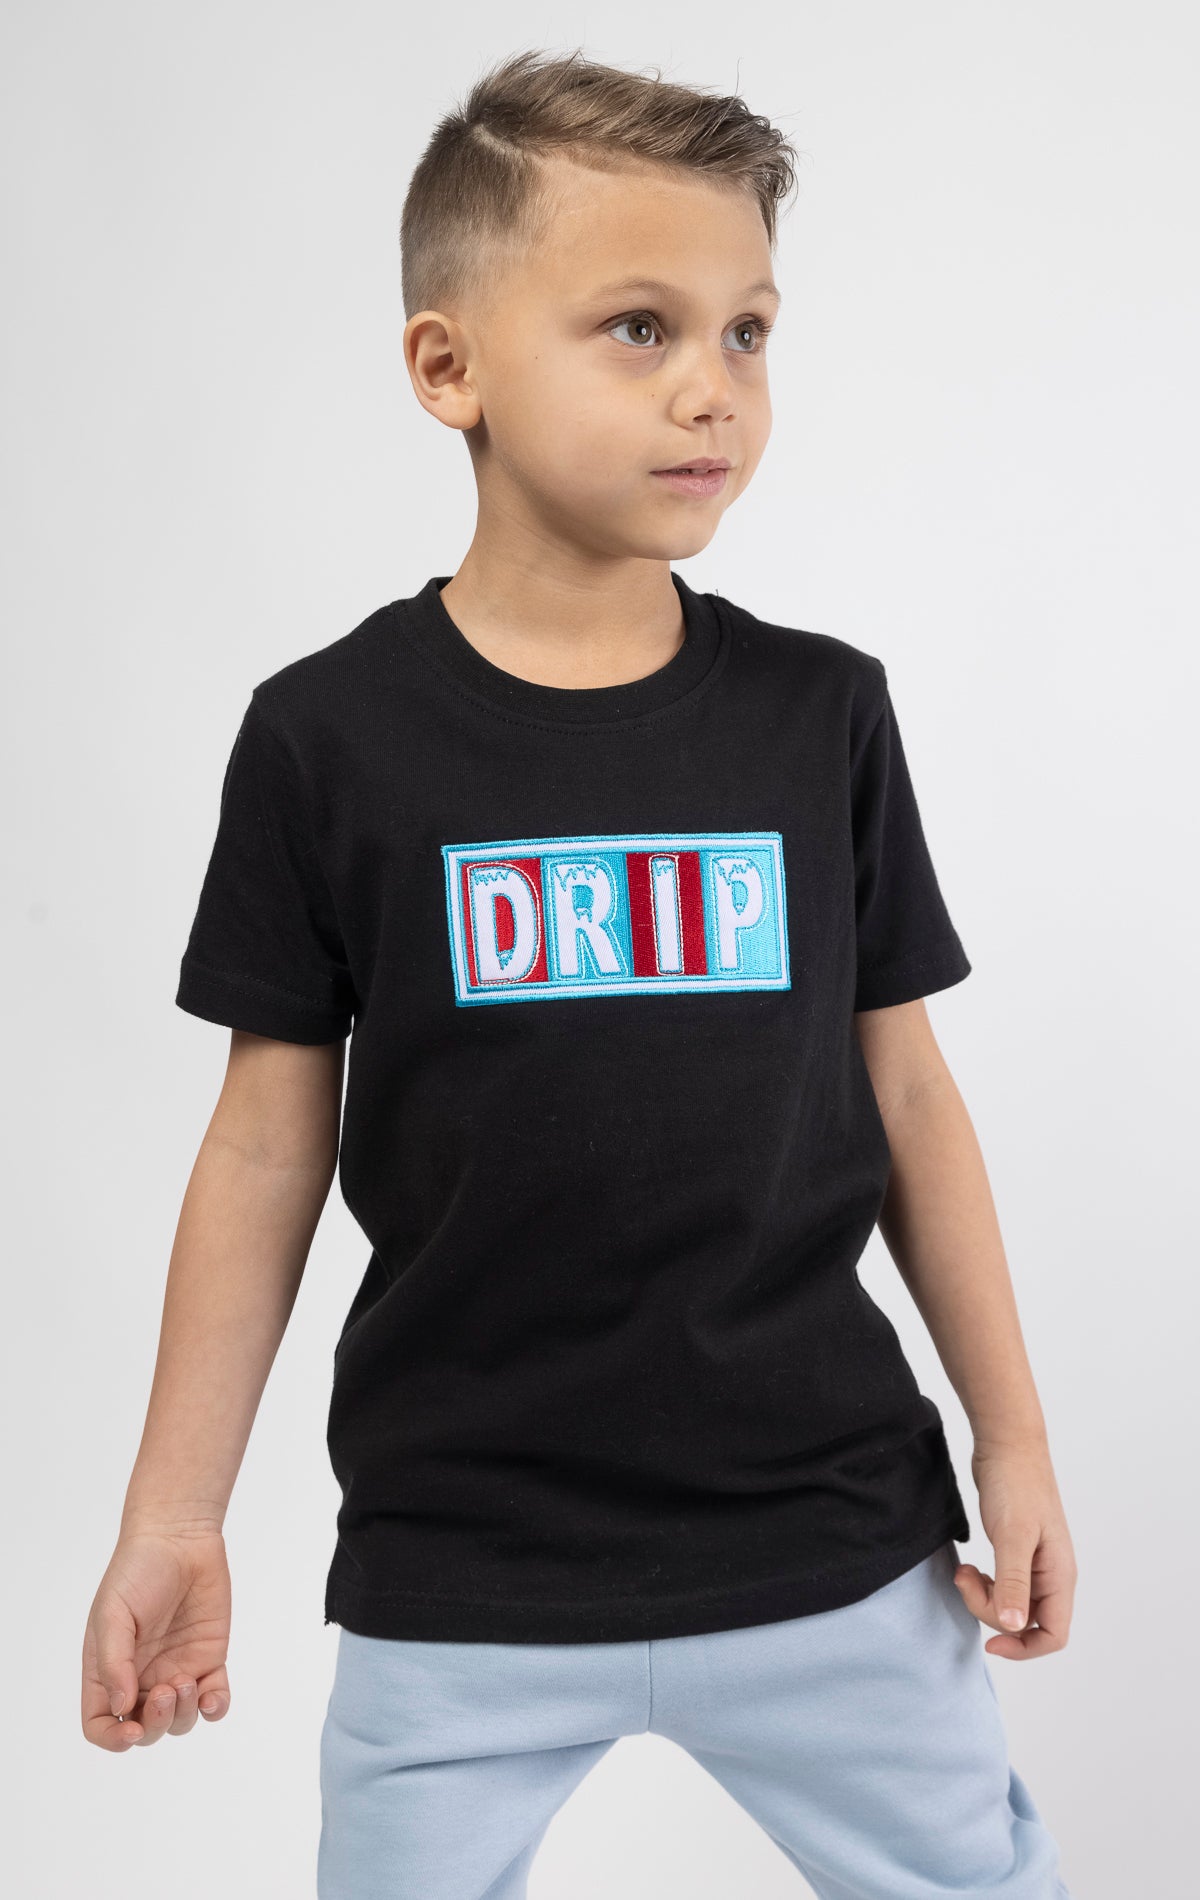 Kids' crew neck t-shirt features a drip patch embroidered on the front and short sleeves. Made of breathable material.